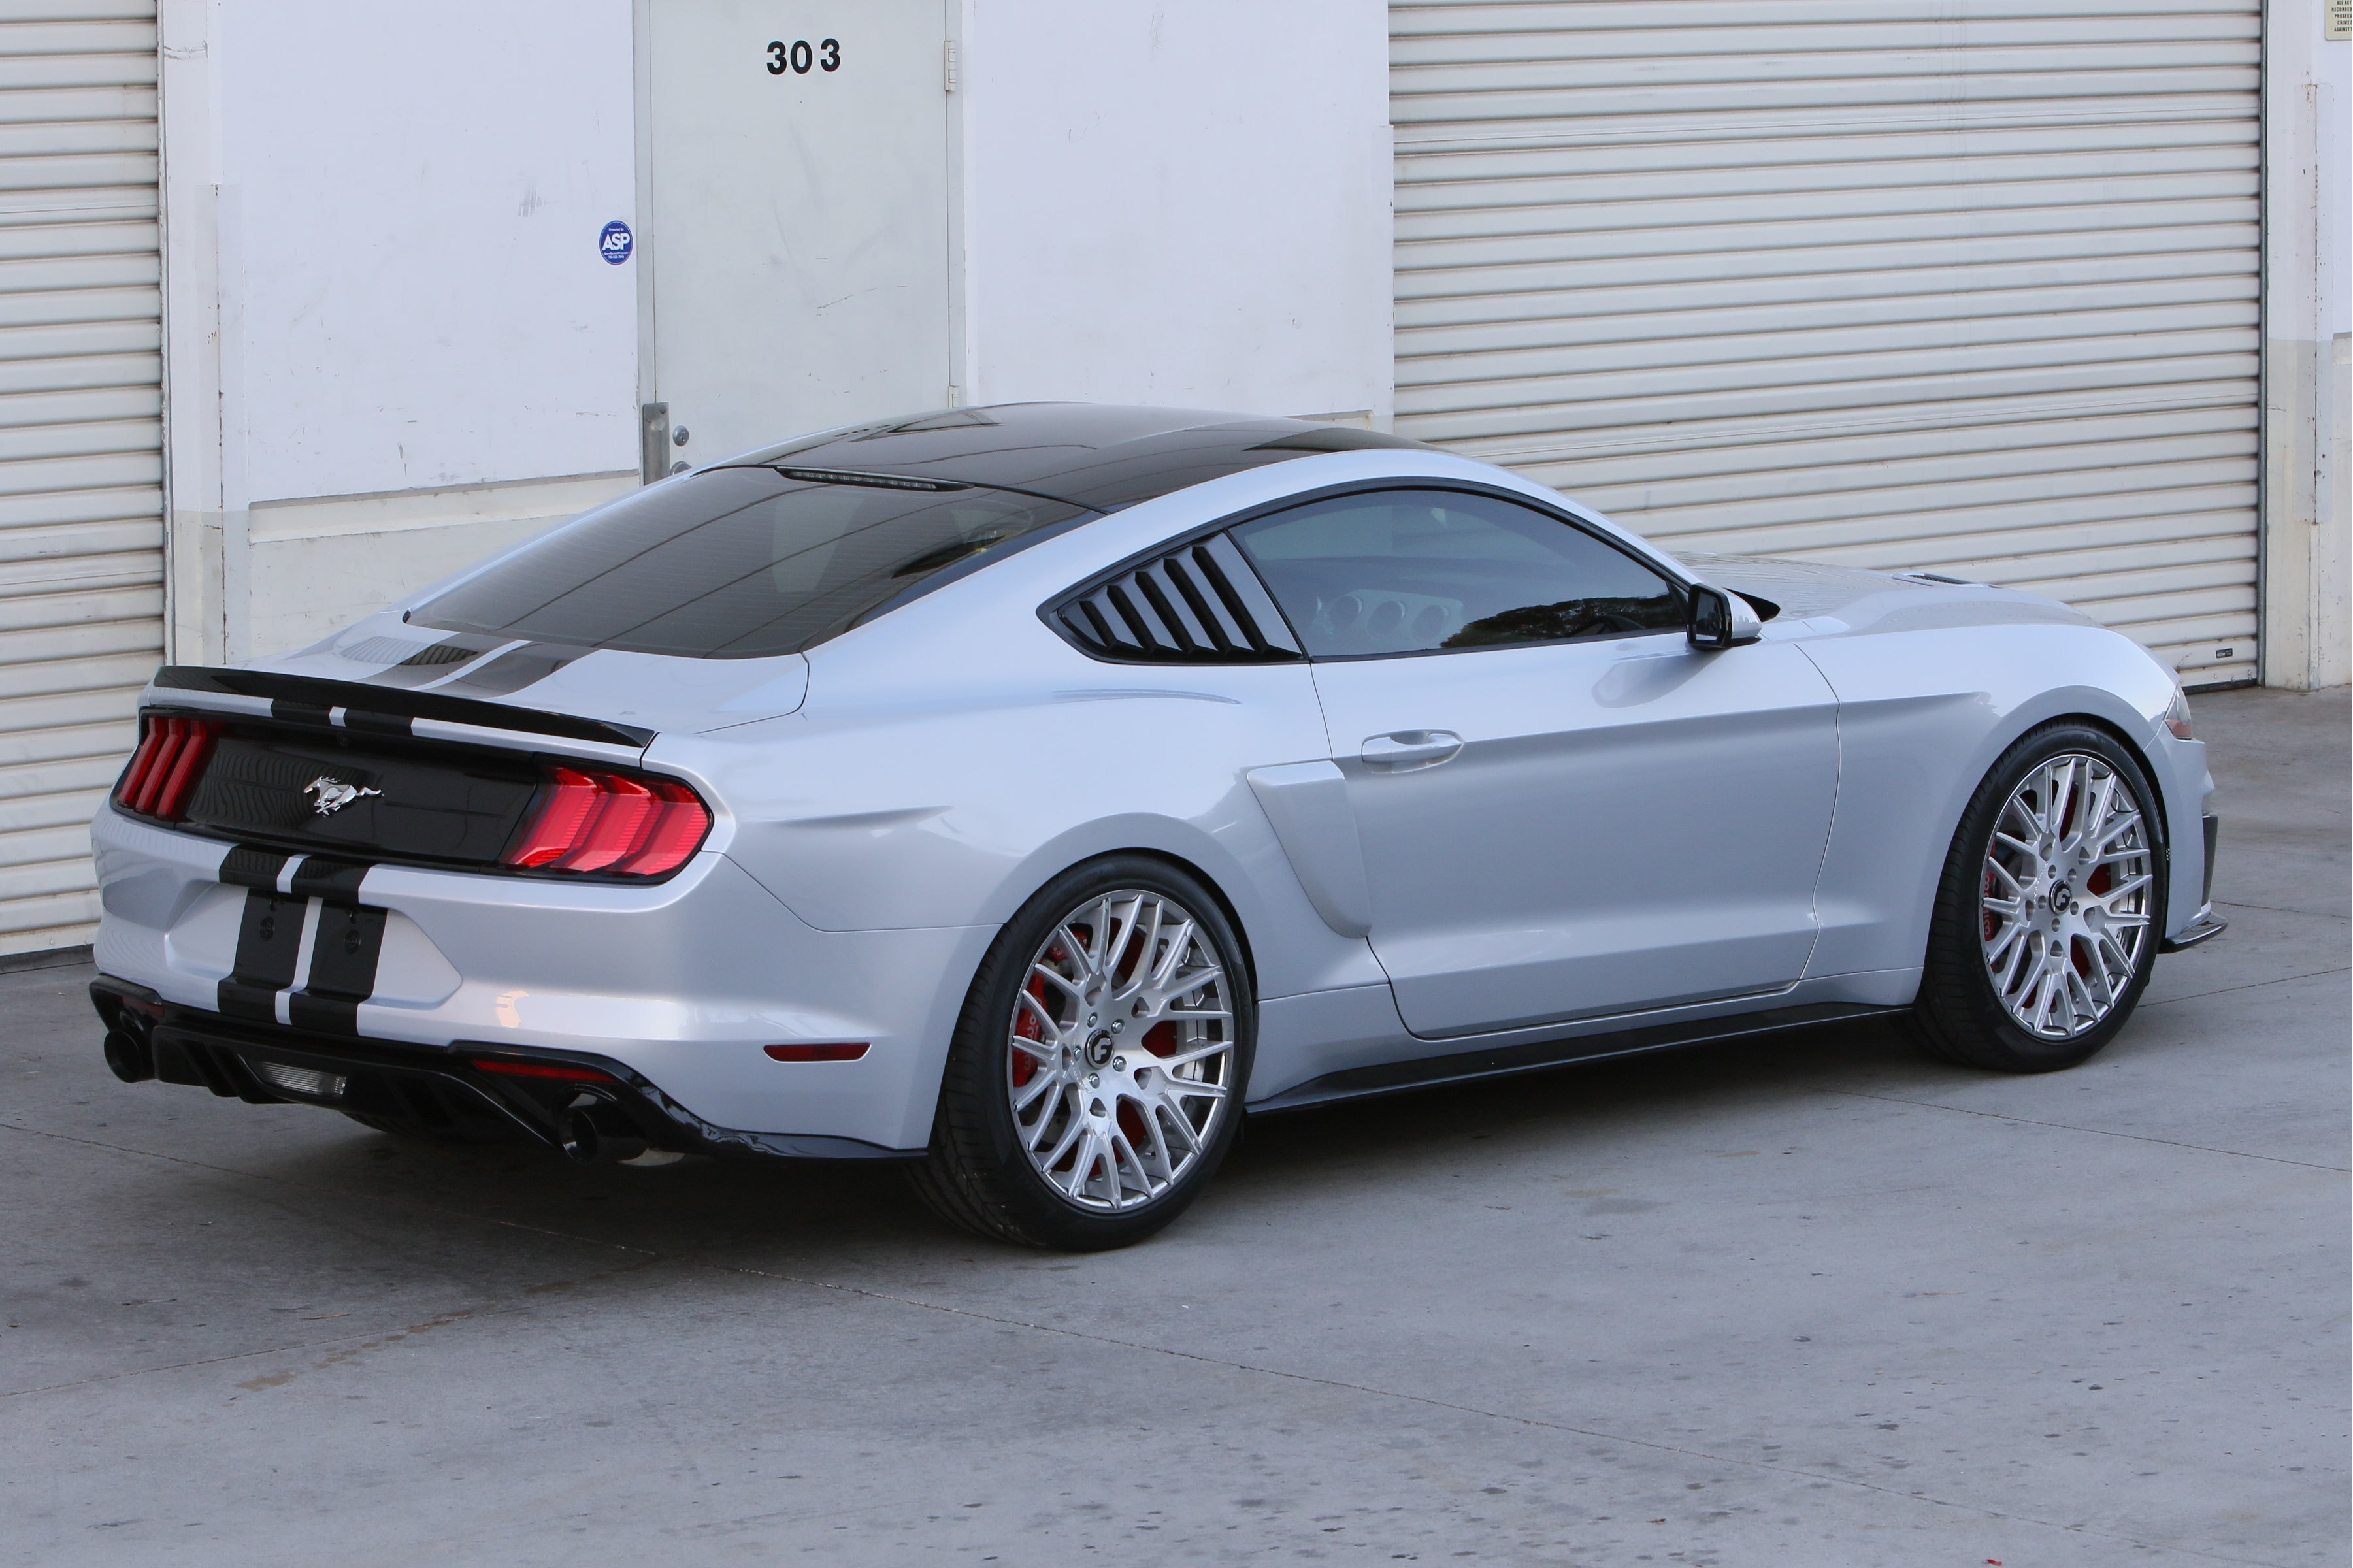 Rear Lip Spoiler on Gray Ford Mustang - Photo by Air Design USA